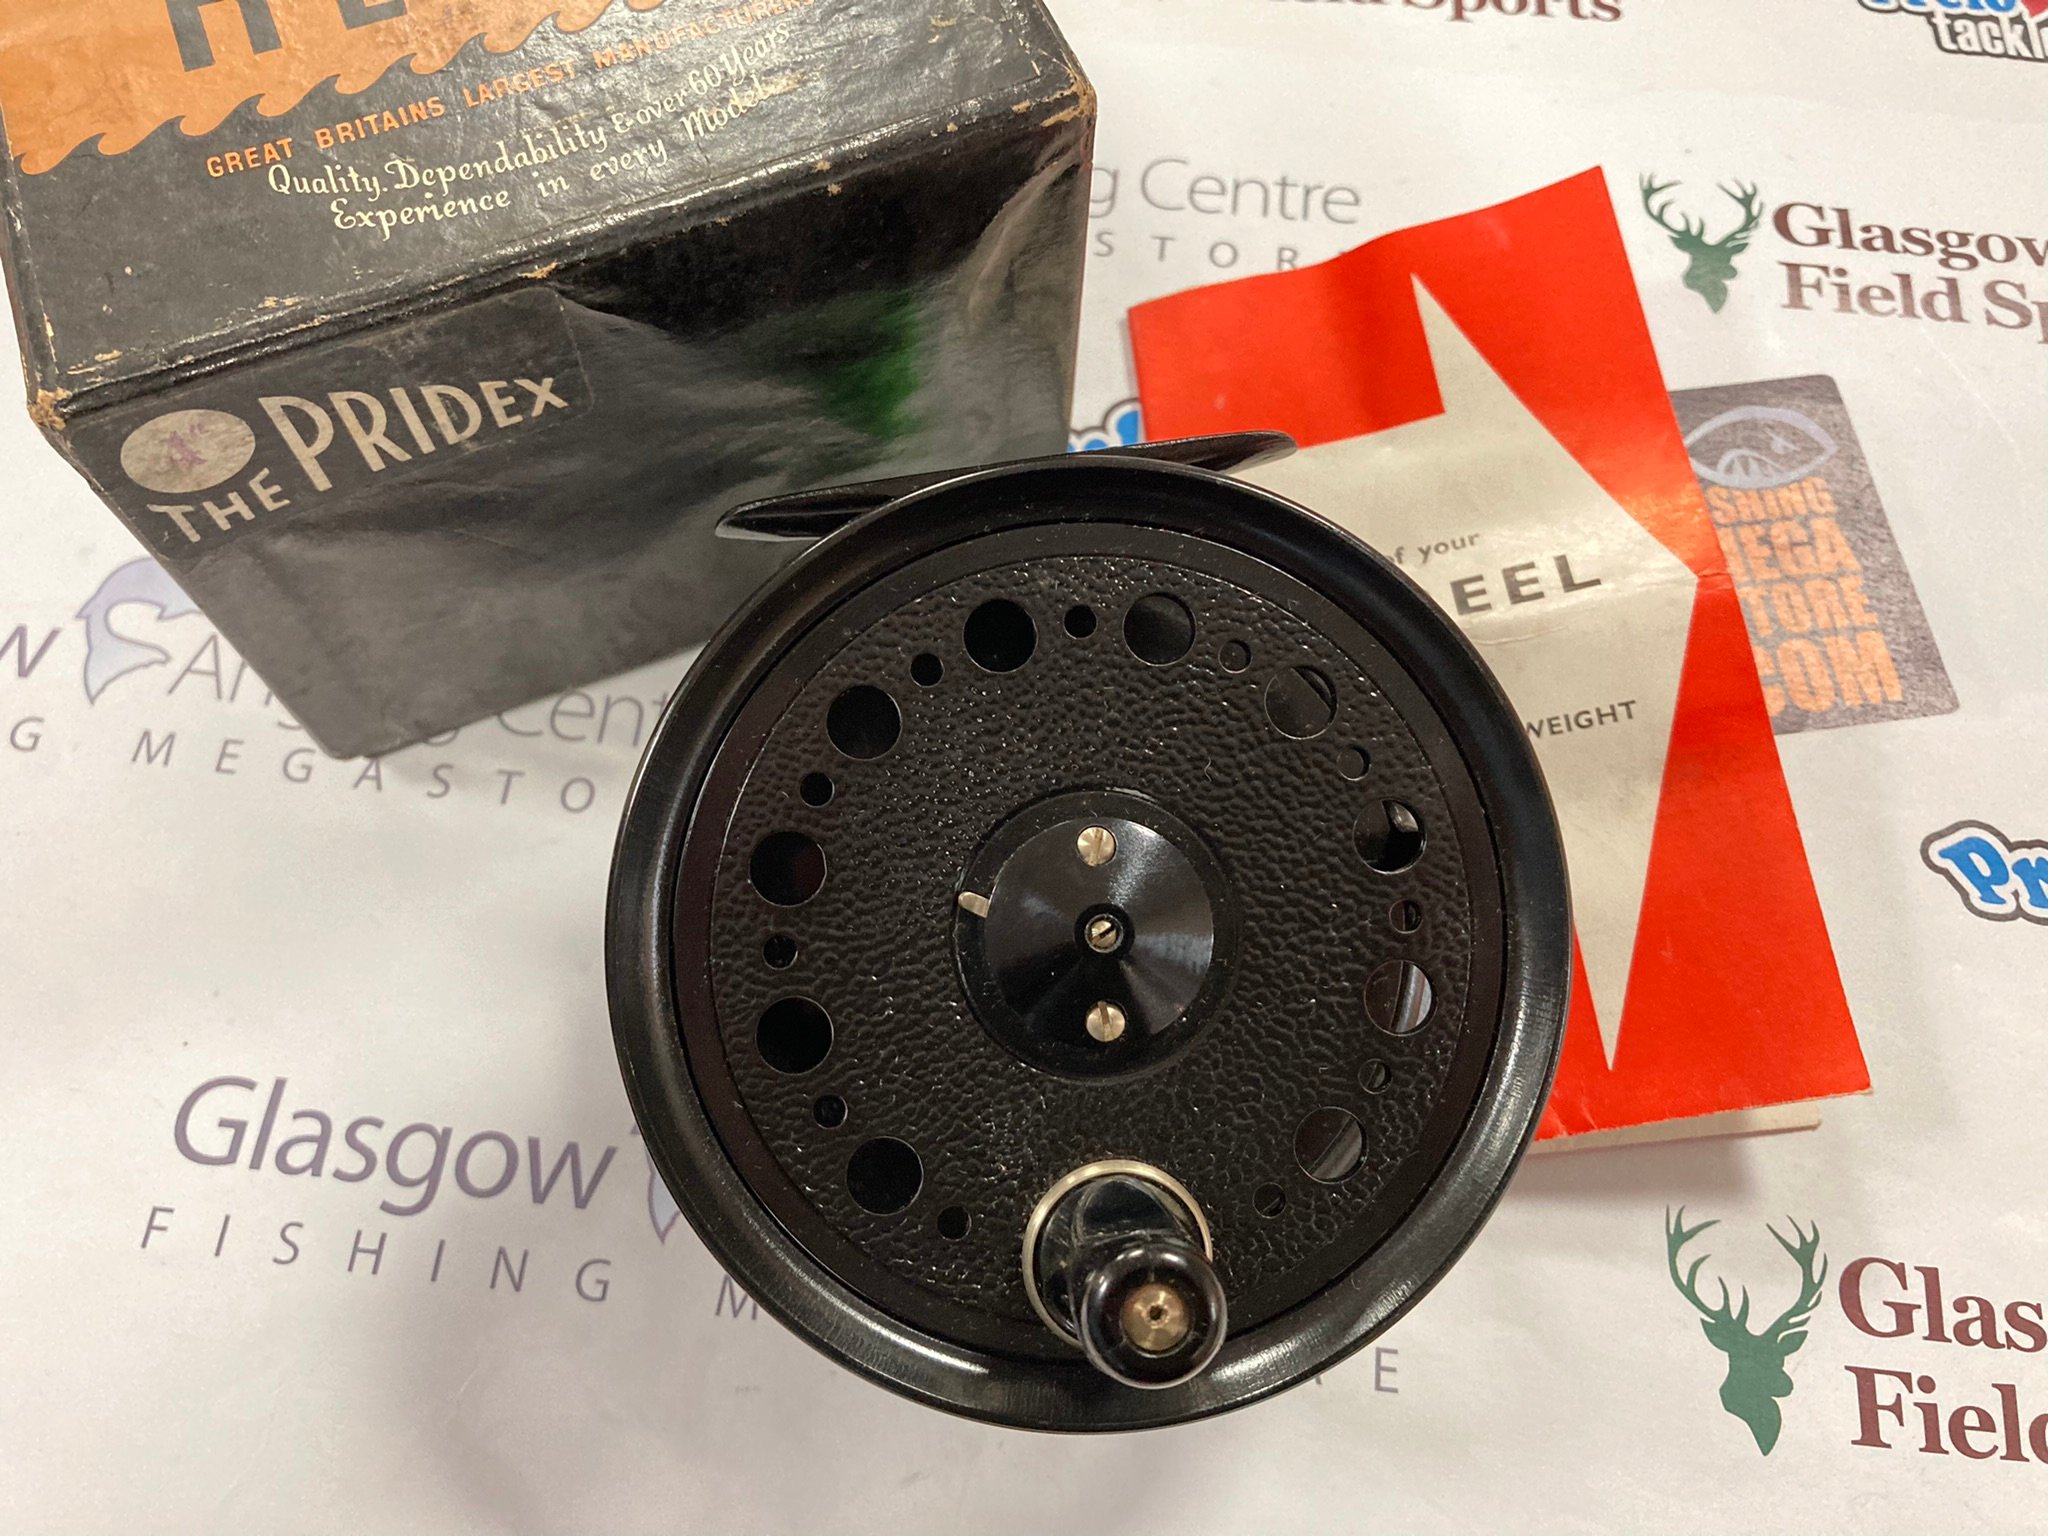 https://cdn.fishingmegastore.com/hires/jw-young/preloved-pridex-4in-wide-salmon-fly-reel-boxed-england-as-new-sh-47701.jpg